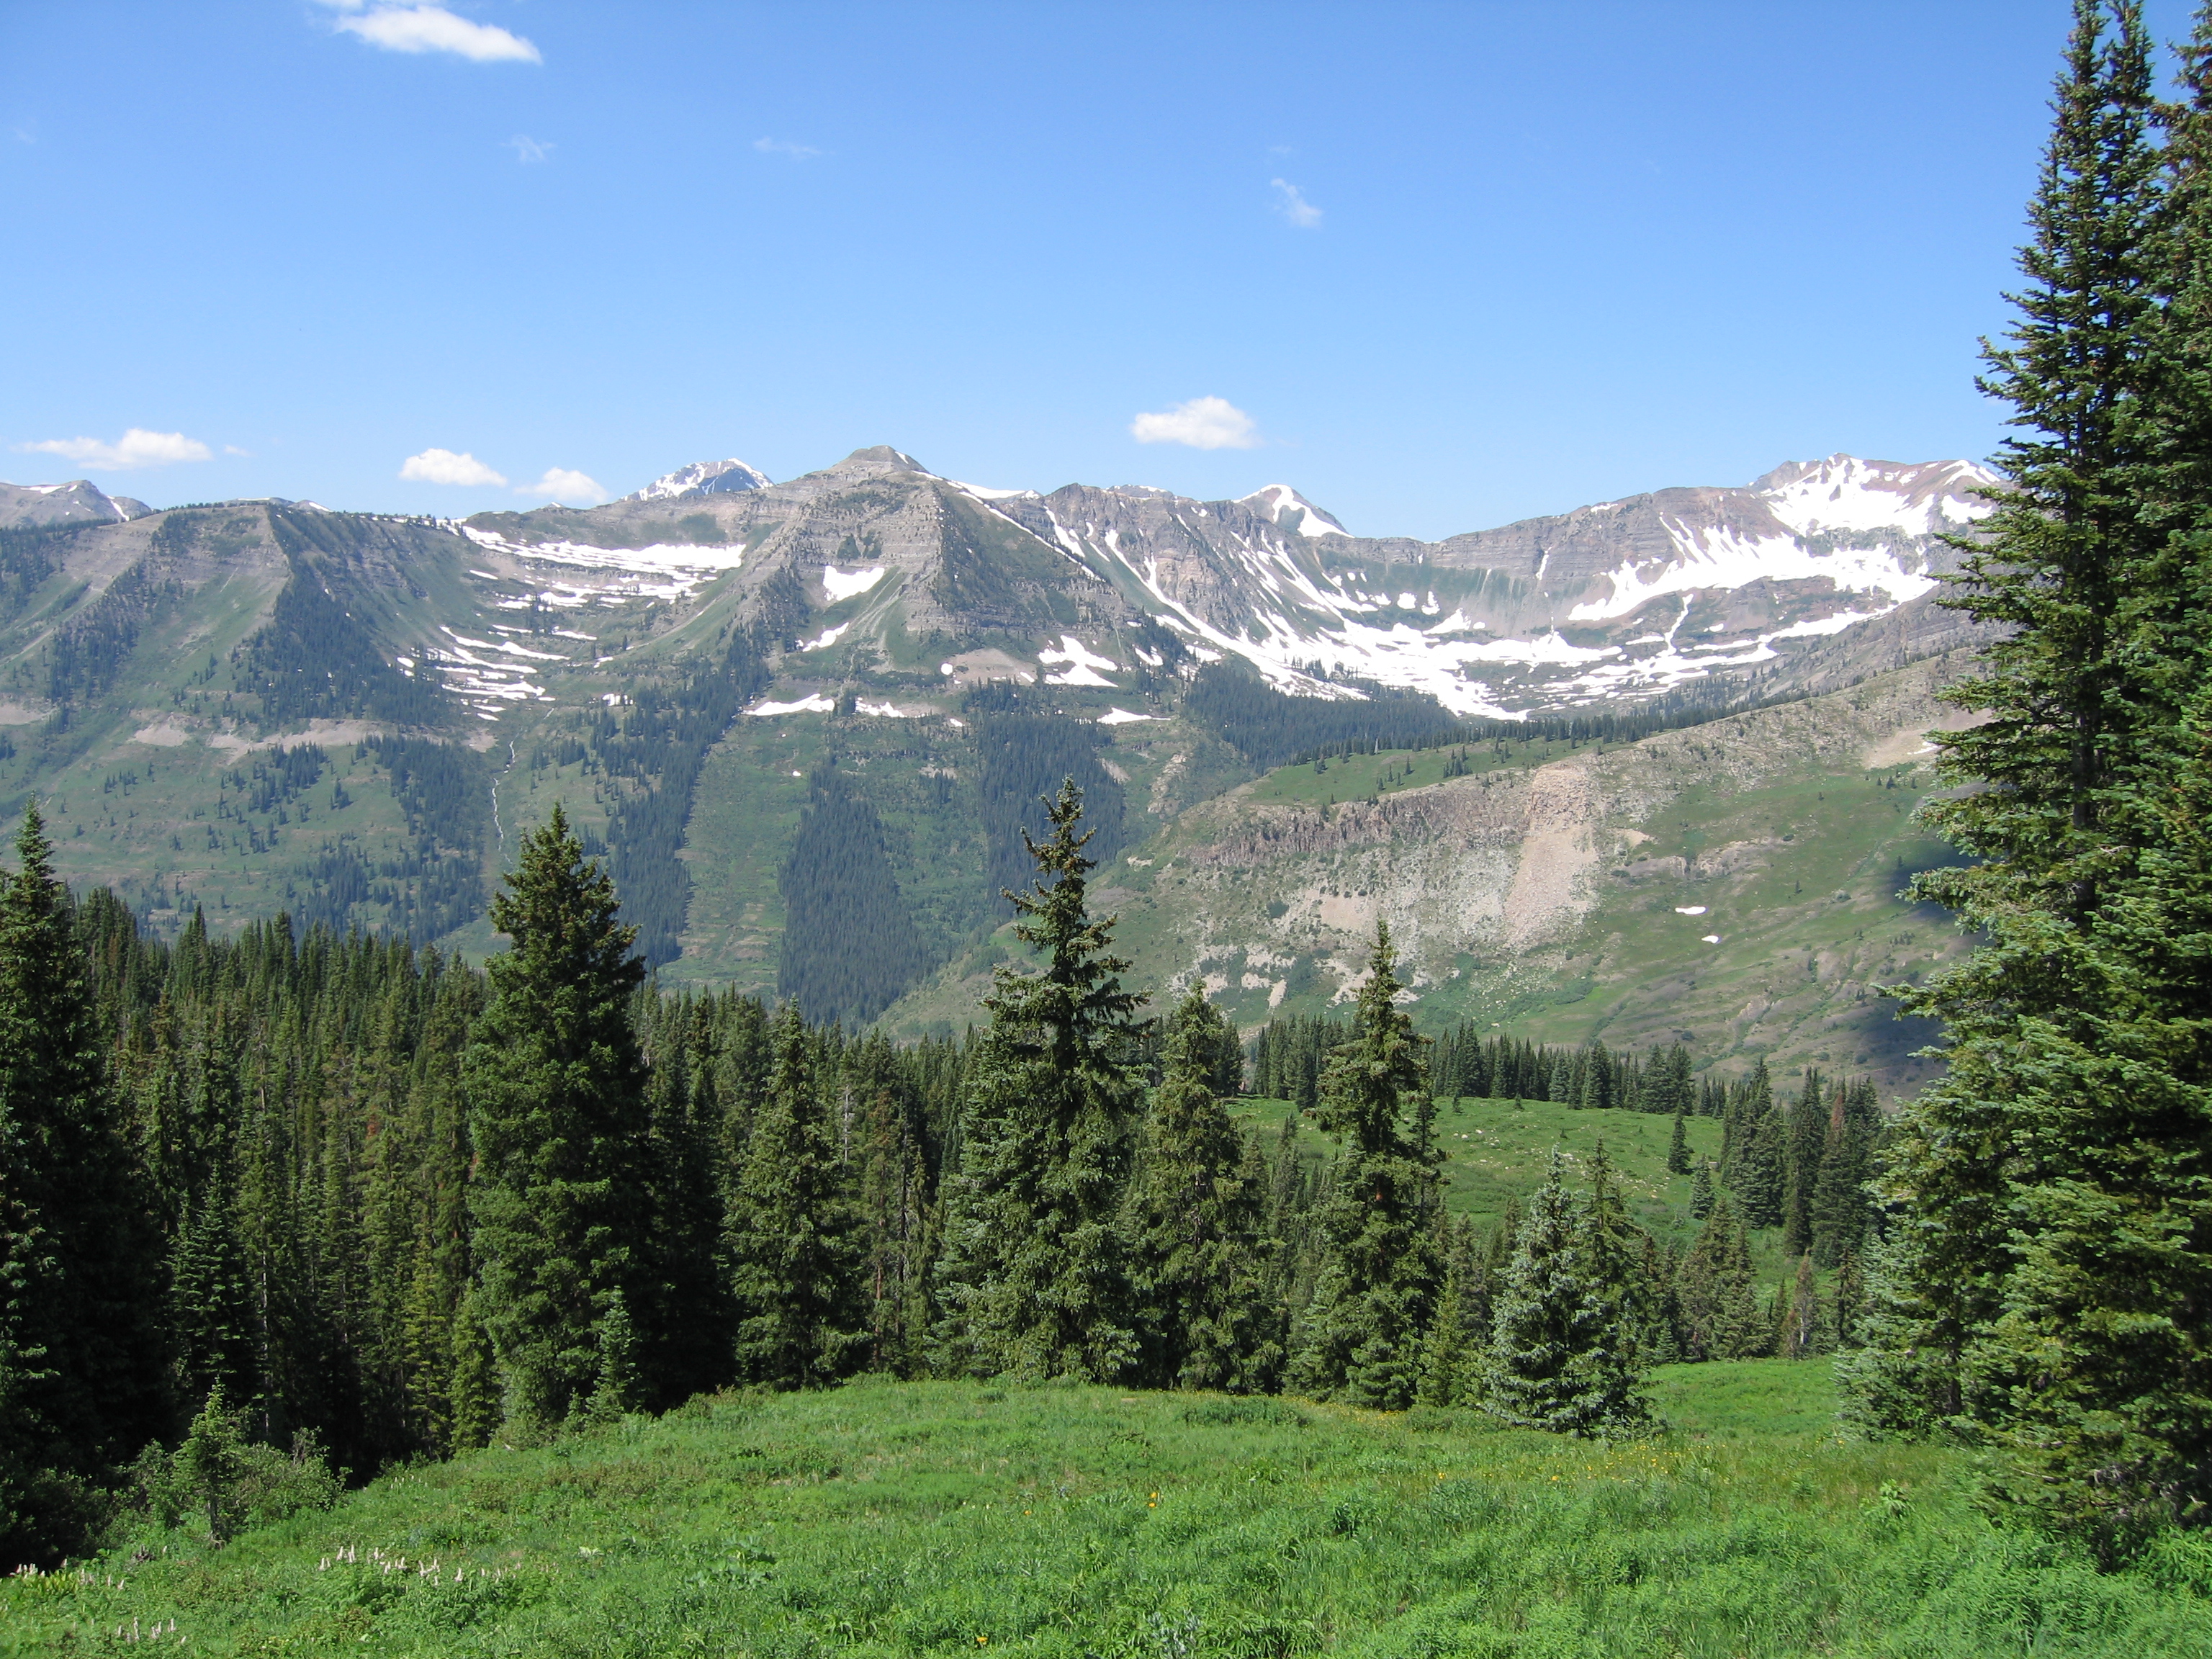 Readers in the ROCKIES « The View From Here